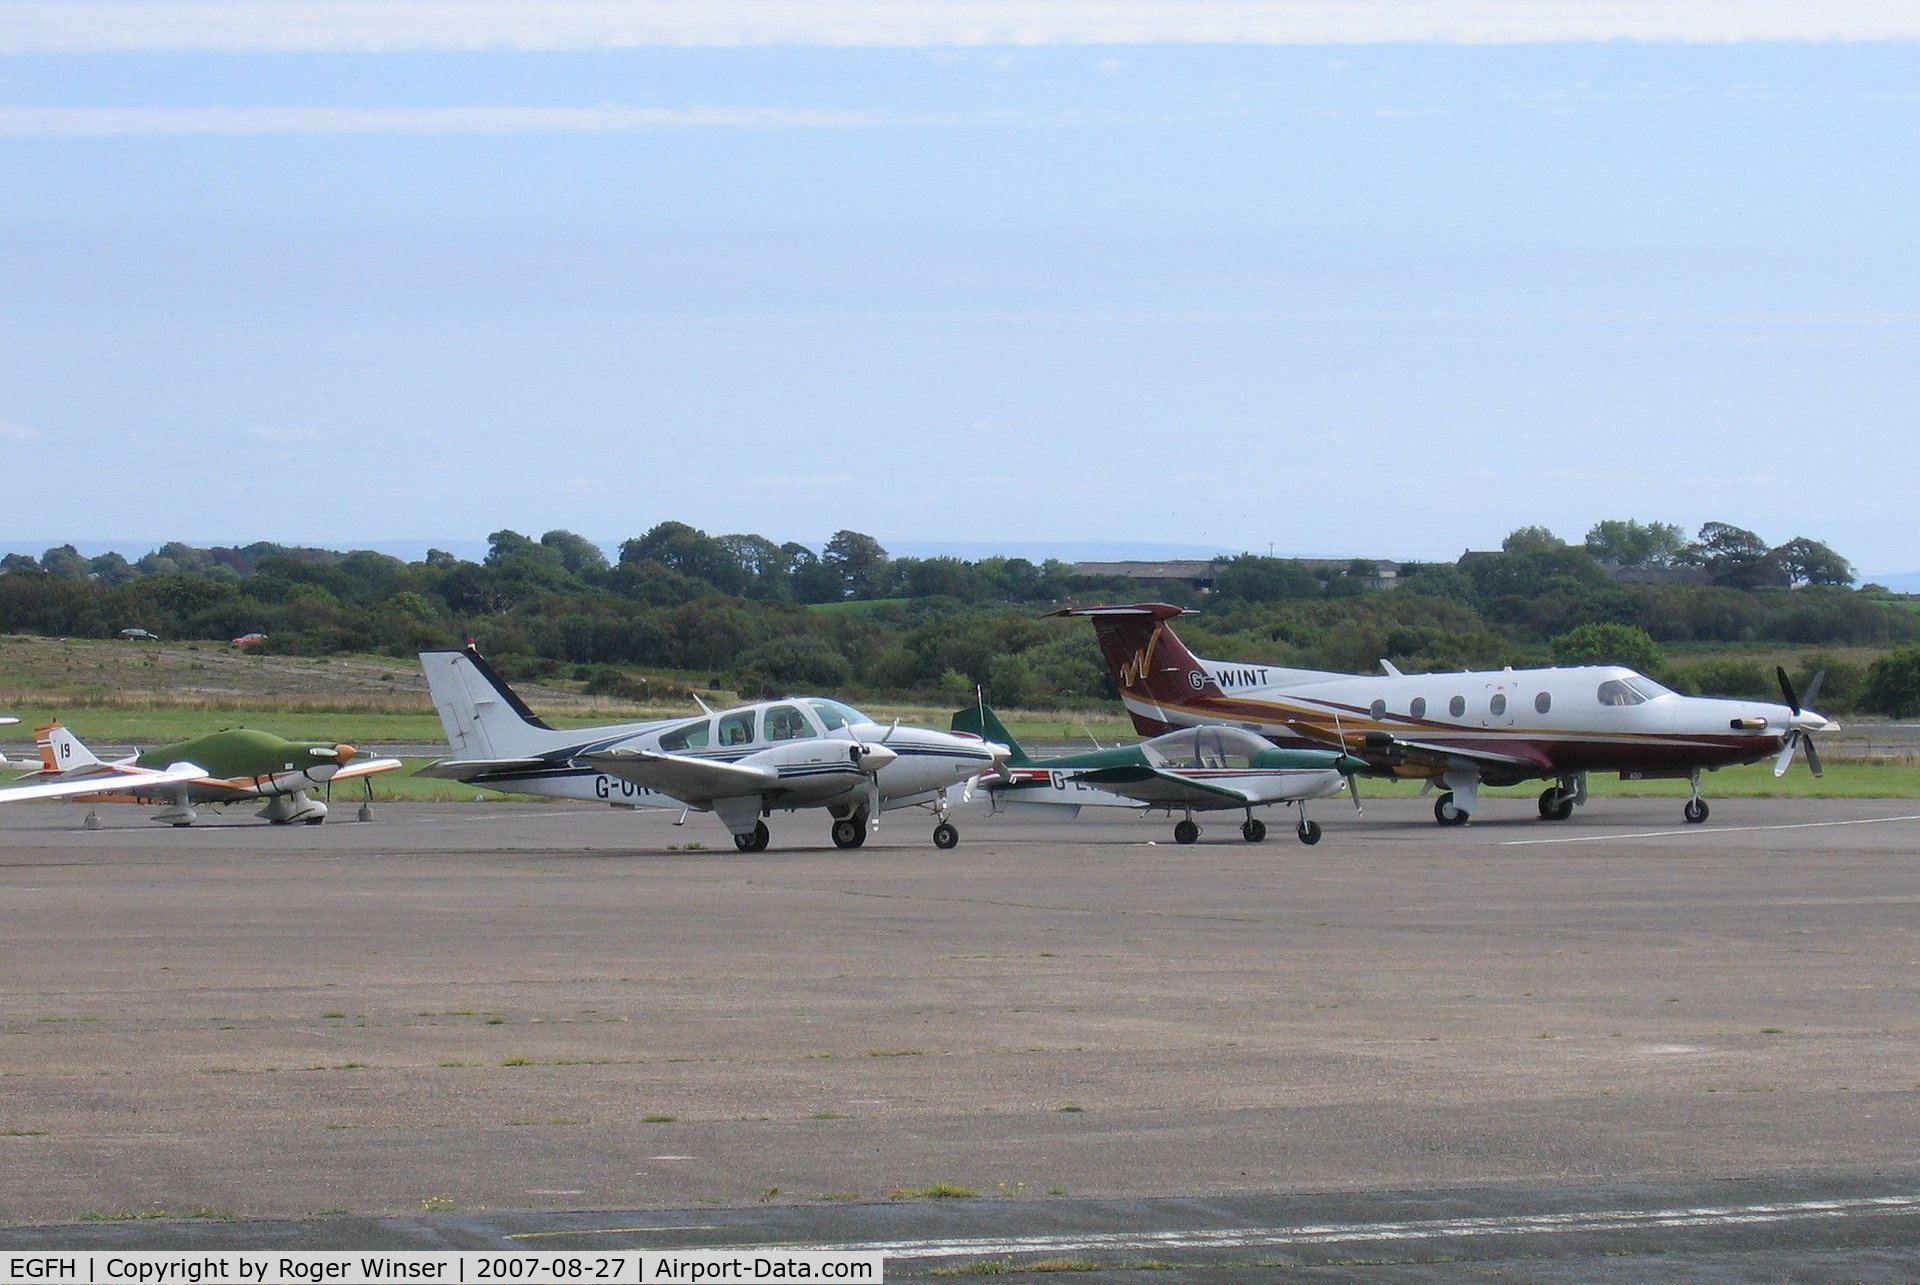 Swansea Airport, Swansea, Wales United Kingdom (EGFH) - Visiting aircraft on the apron.